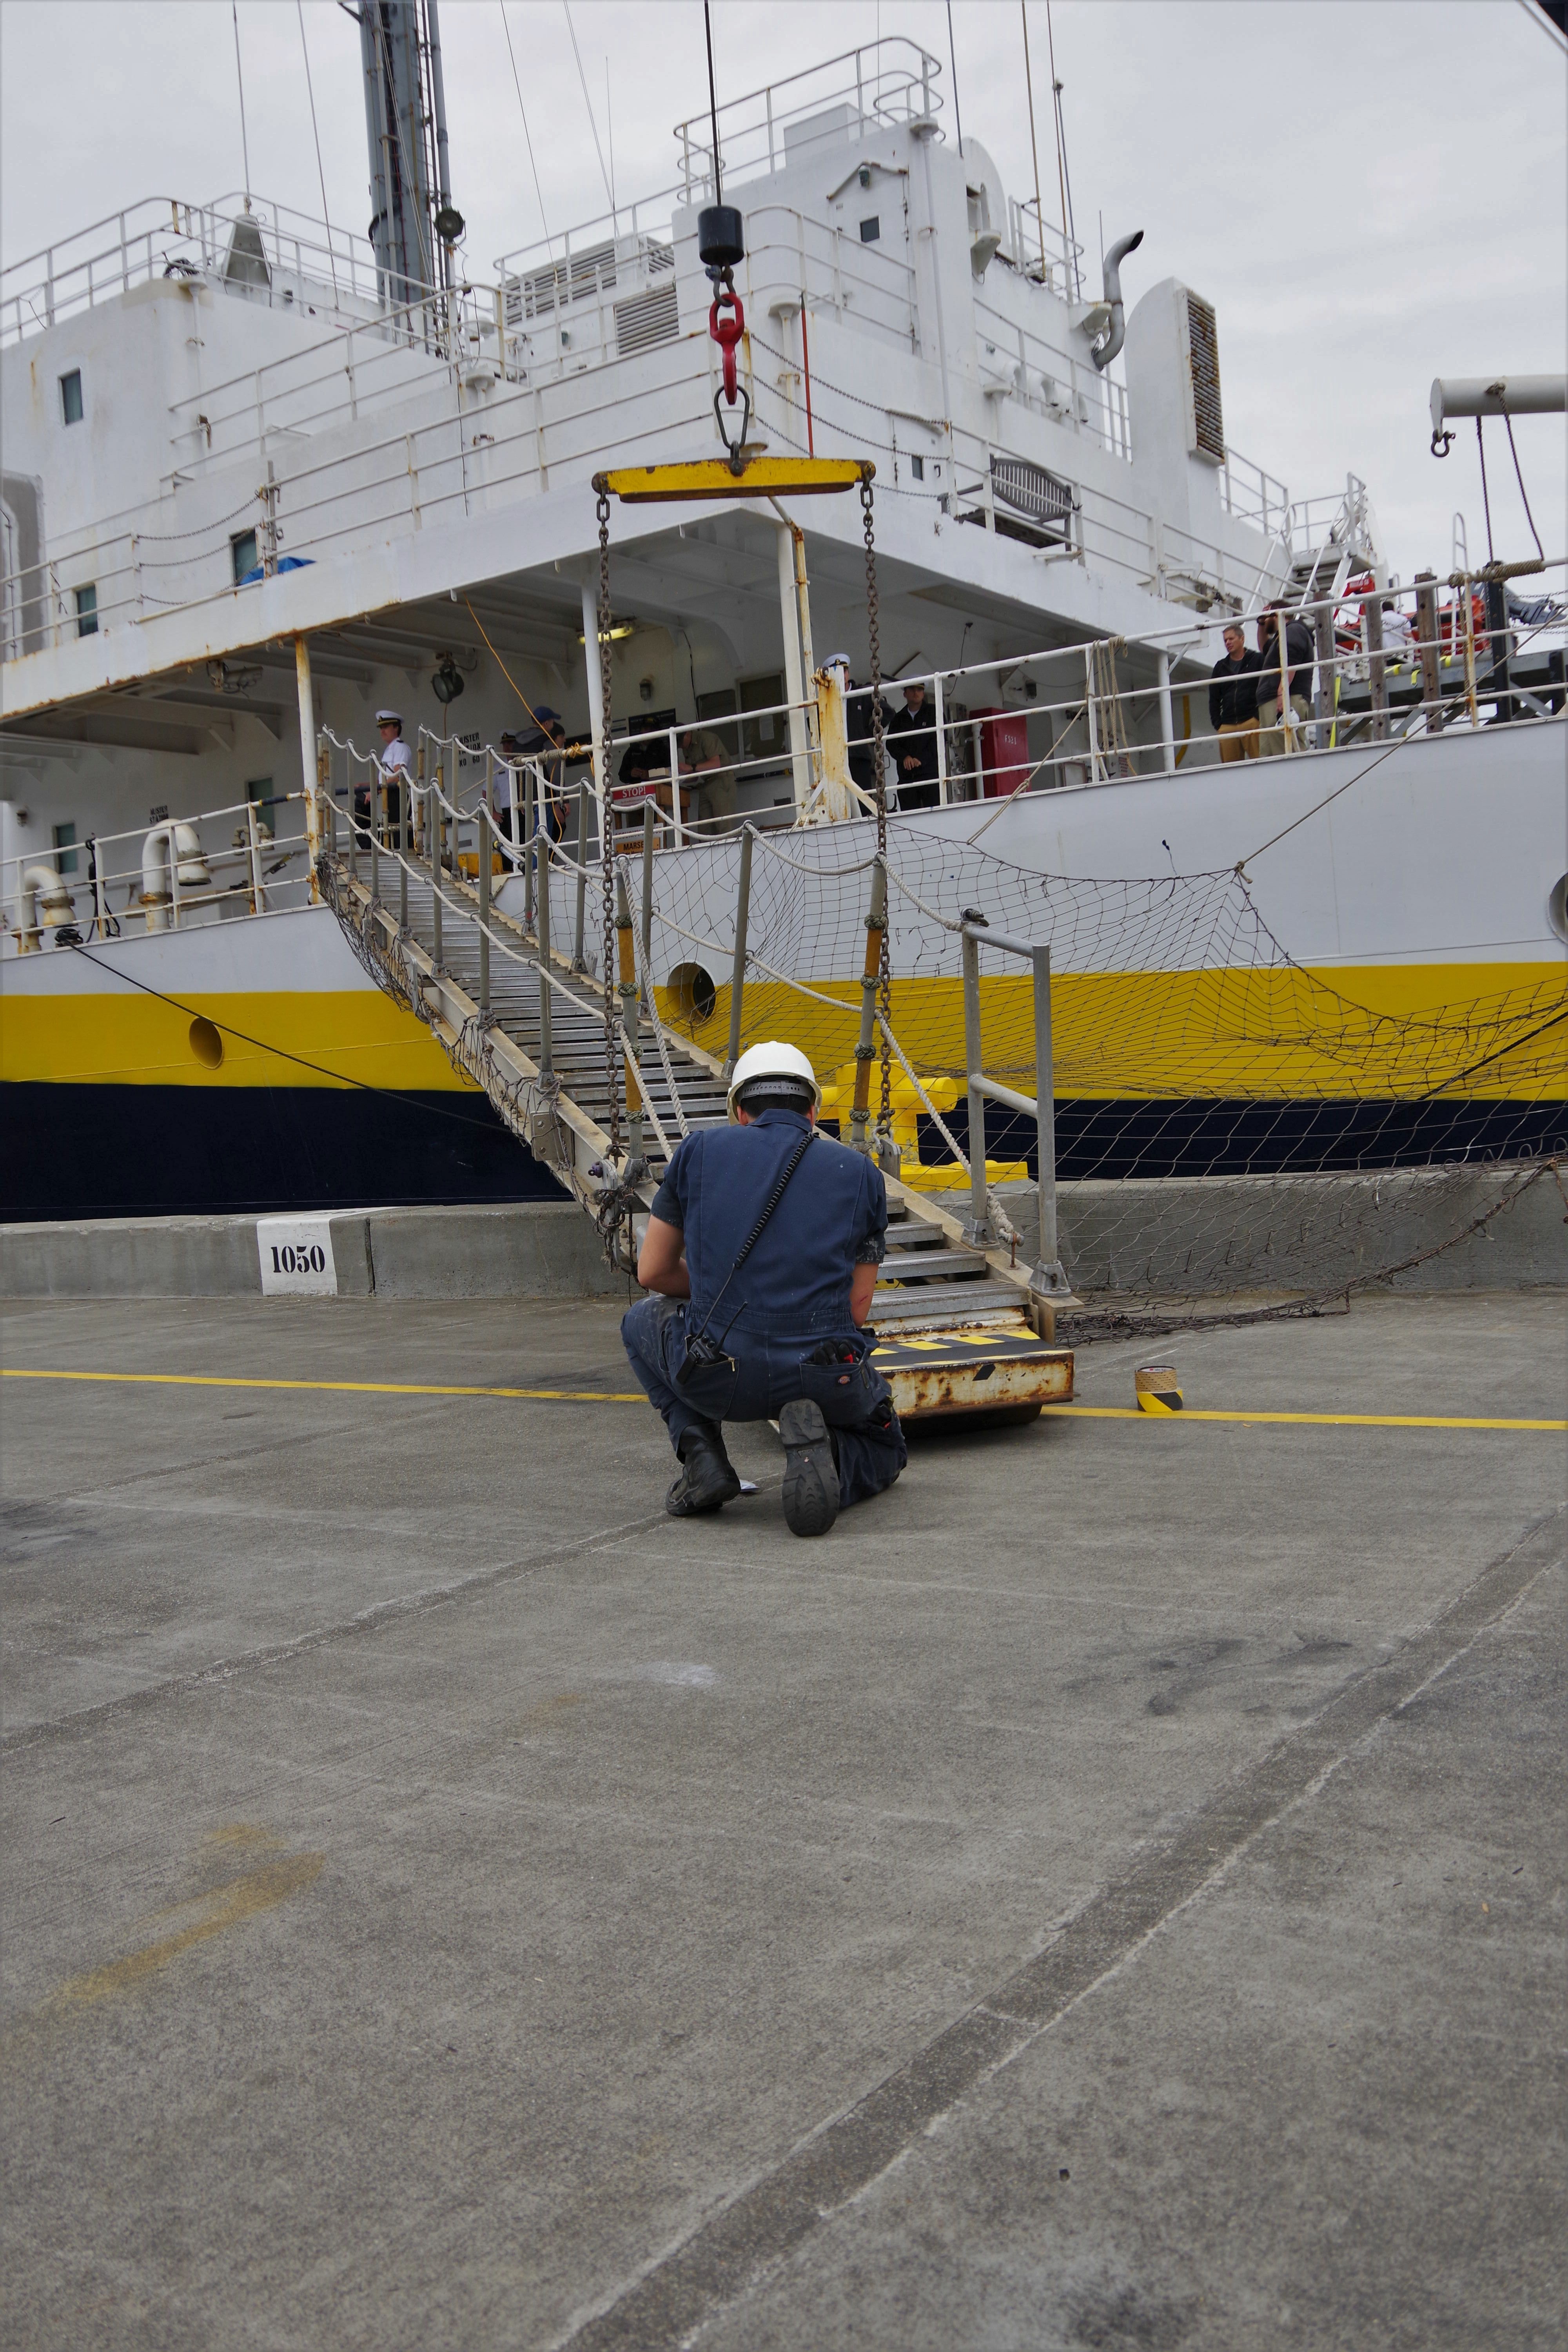 Ordinary seaman Luciano Salazano replaces nonskid on gangway- Photo credit- Emily Robison